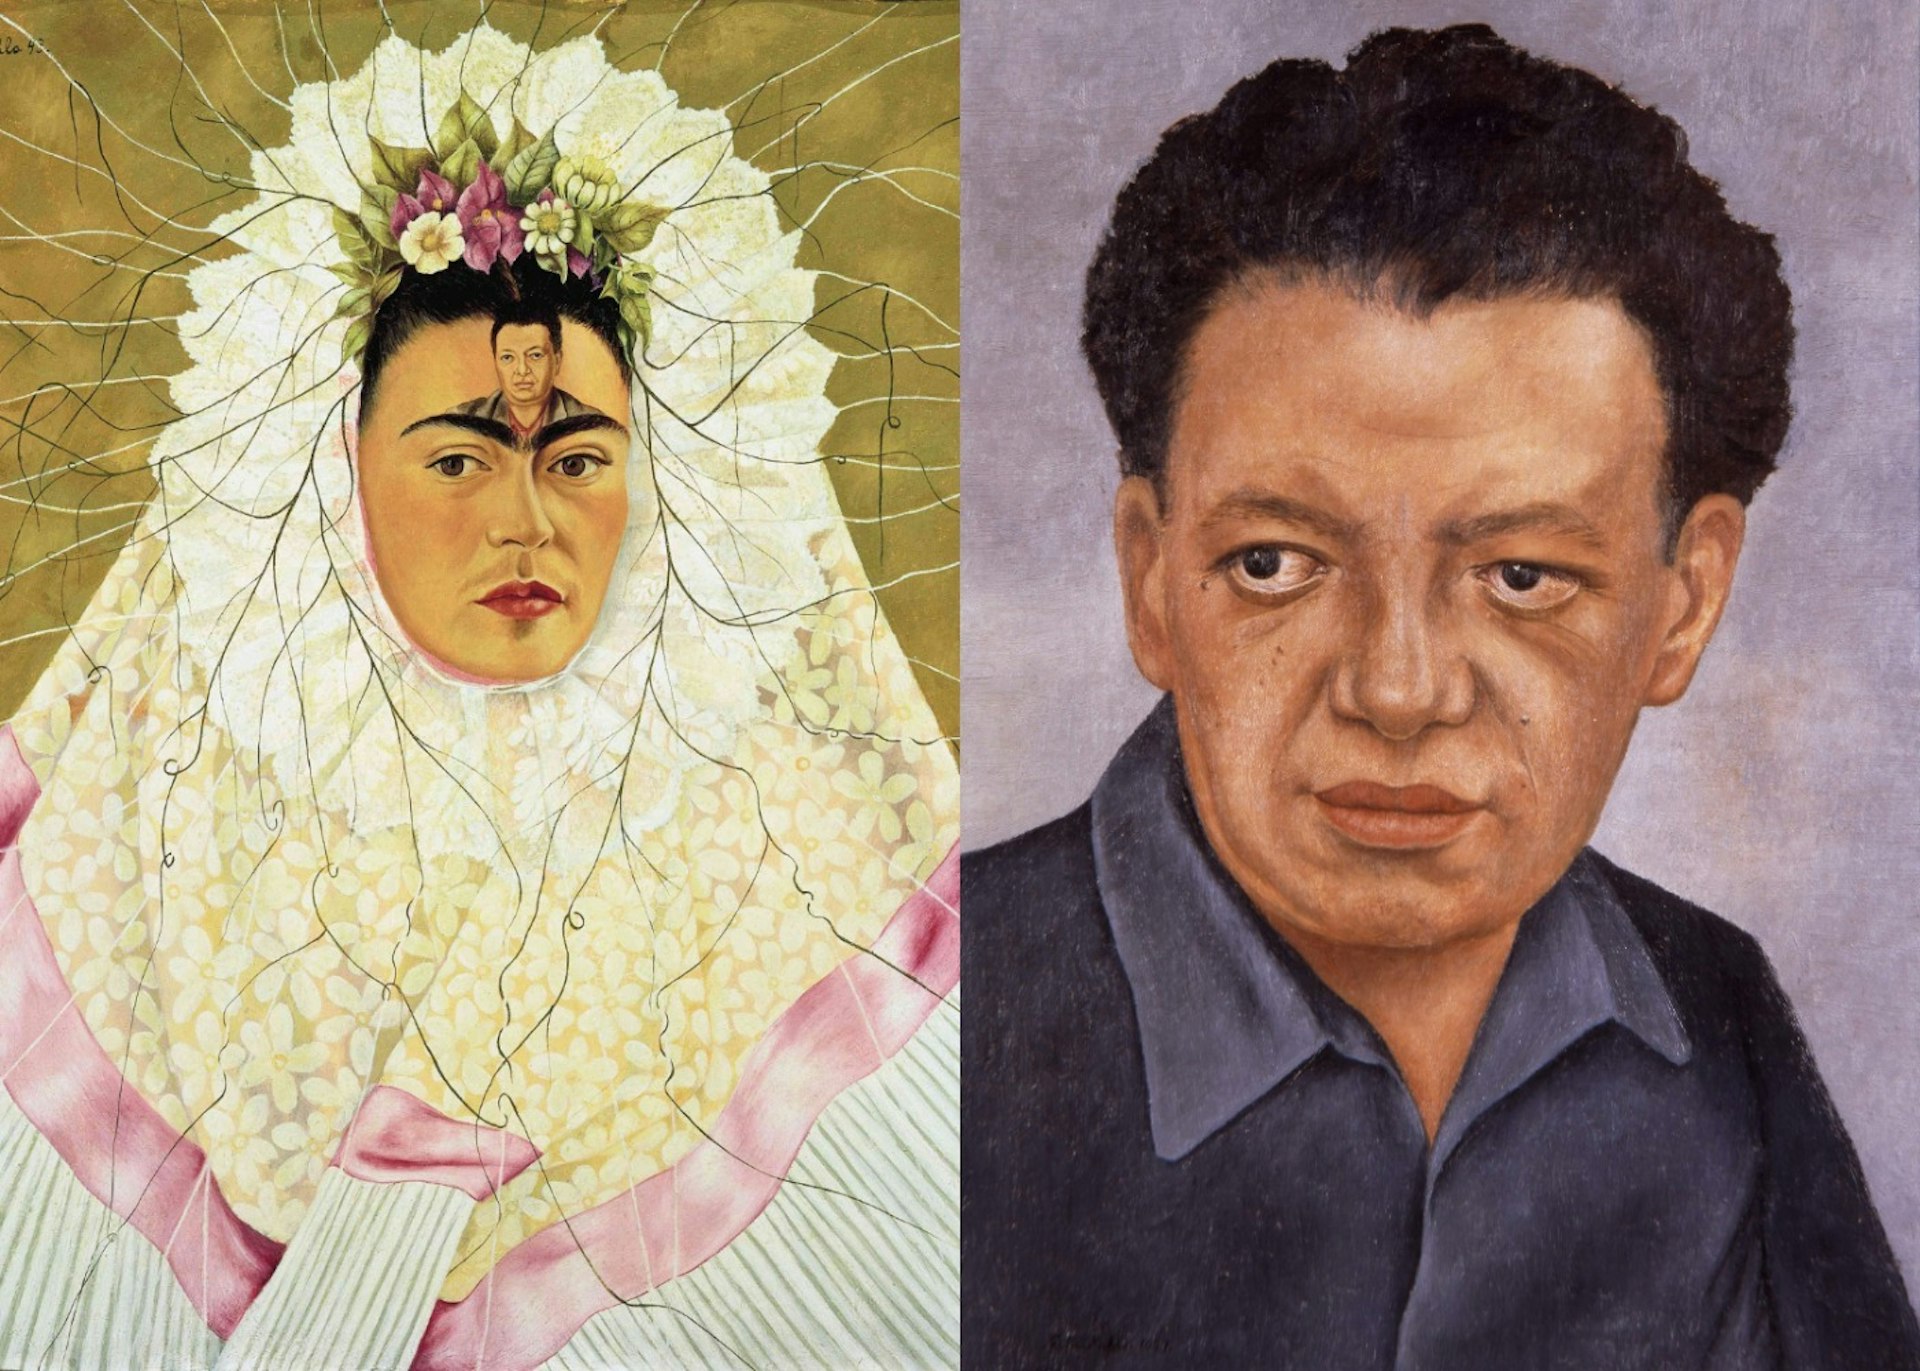 Frida Kahlo, Diego Rivera and the rise of Mexican Modernism